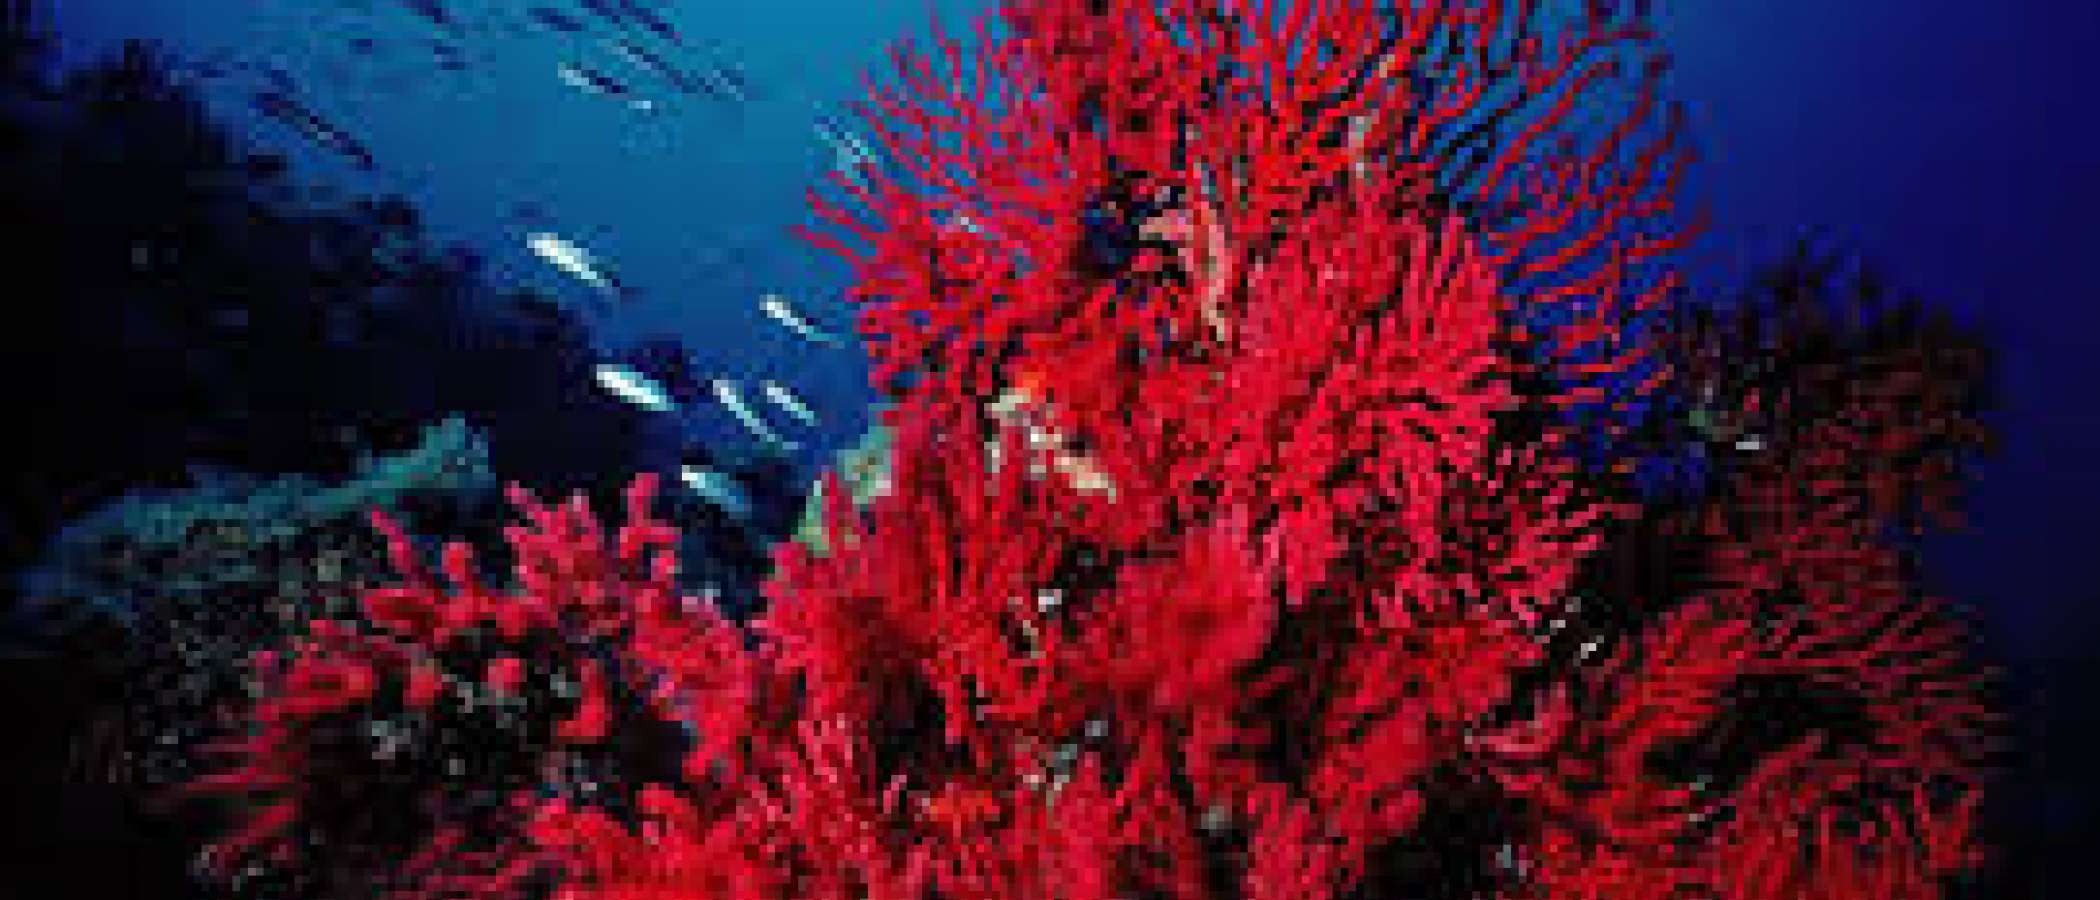 ADDA joins the Platform for the protection of red coral.